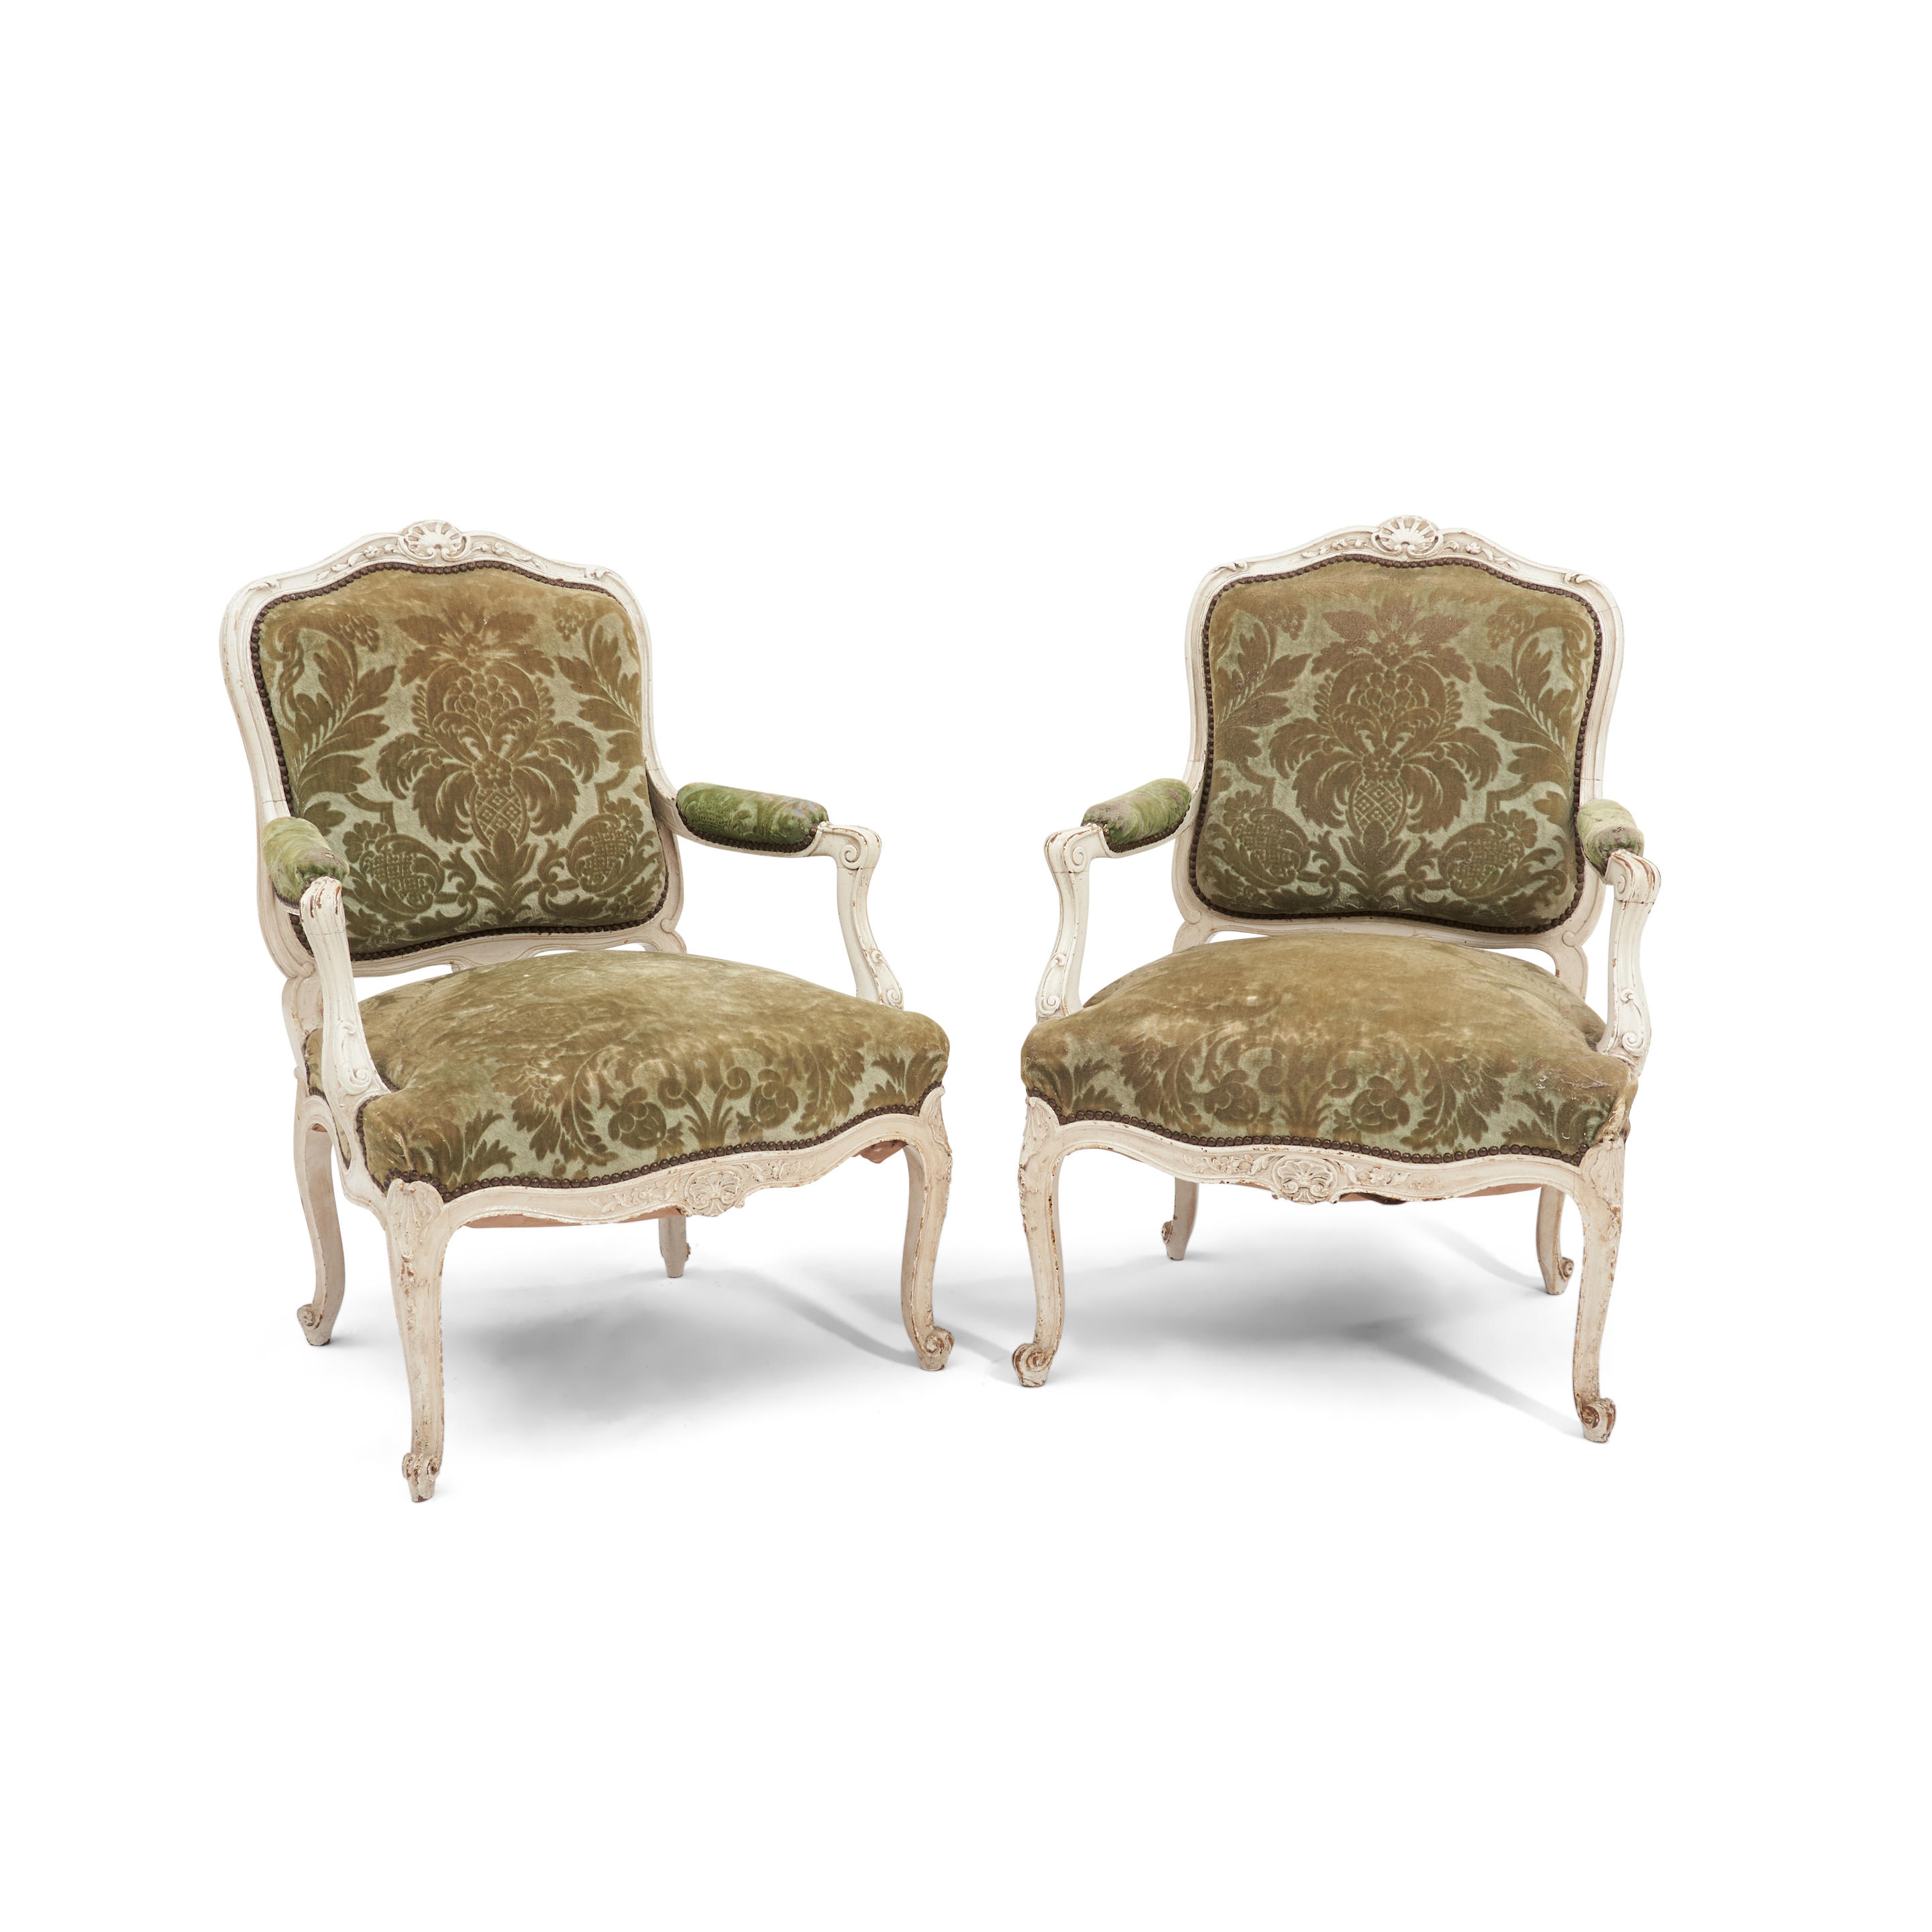 PAIR OF LOUIS XV STYLE WHITE PAINTED 3ae823